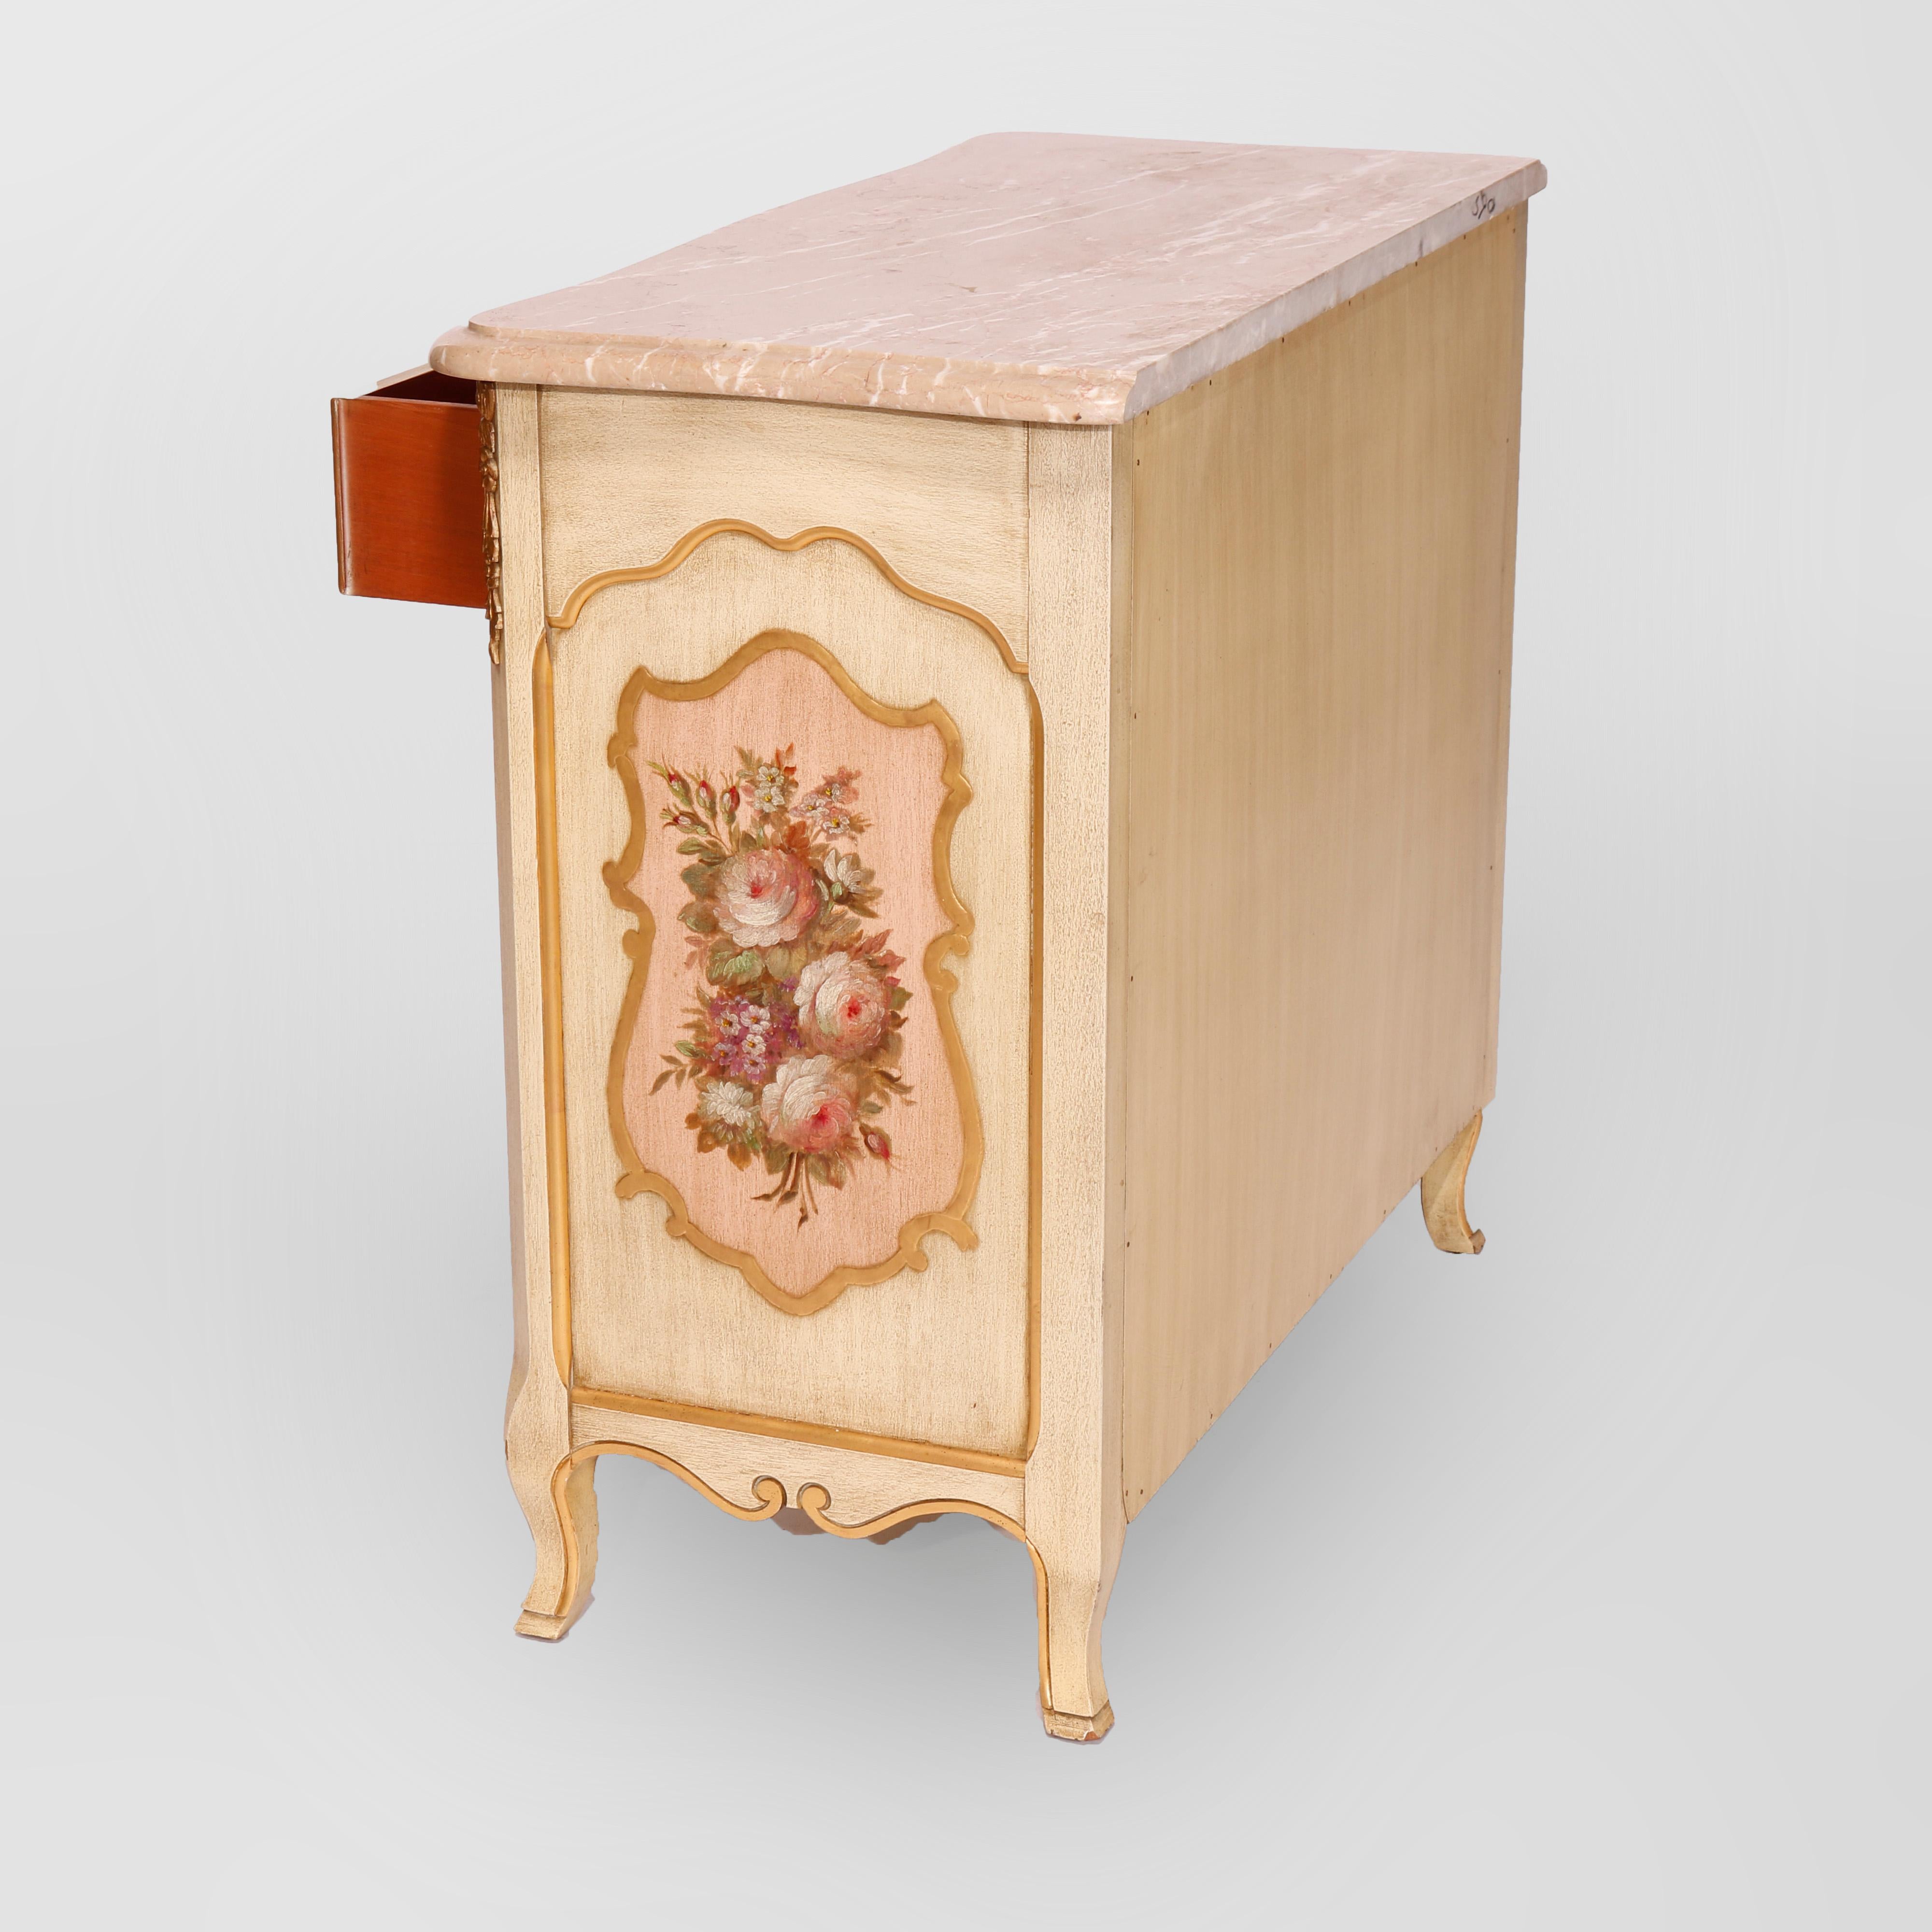 French Provincial Style Polychrome, Gilt &Marble Commode by Kozak Studios 20th C For Sale 6